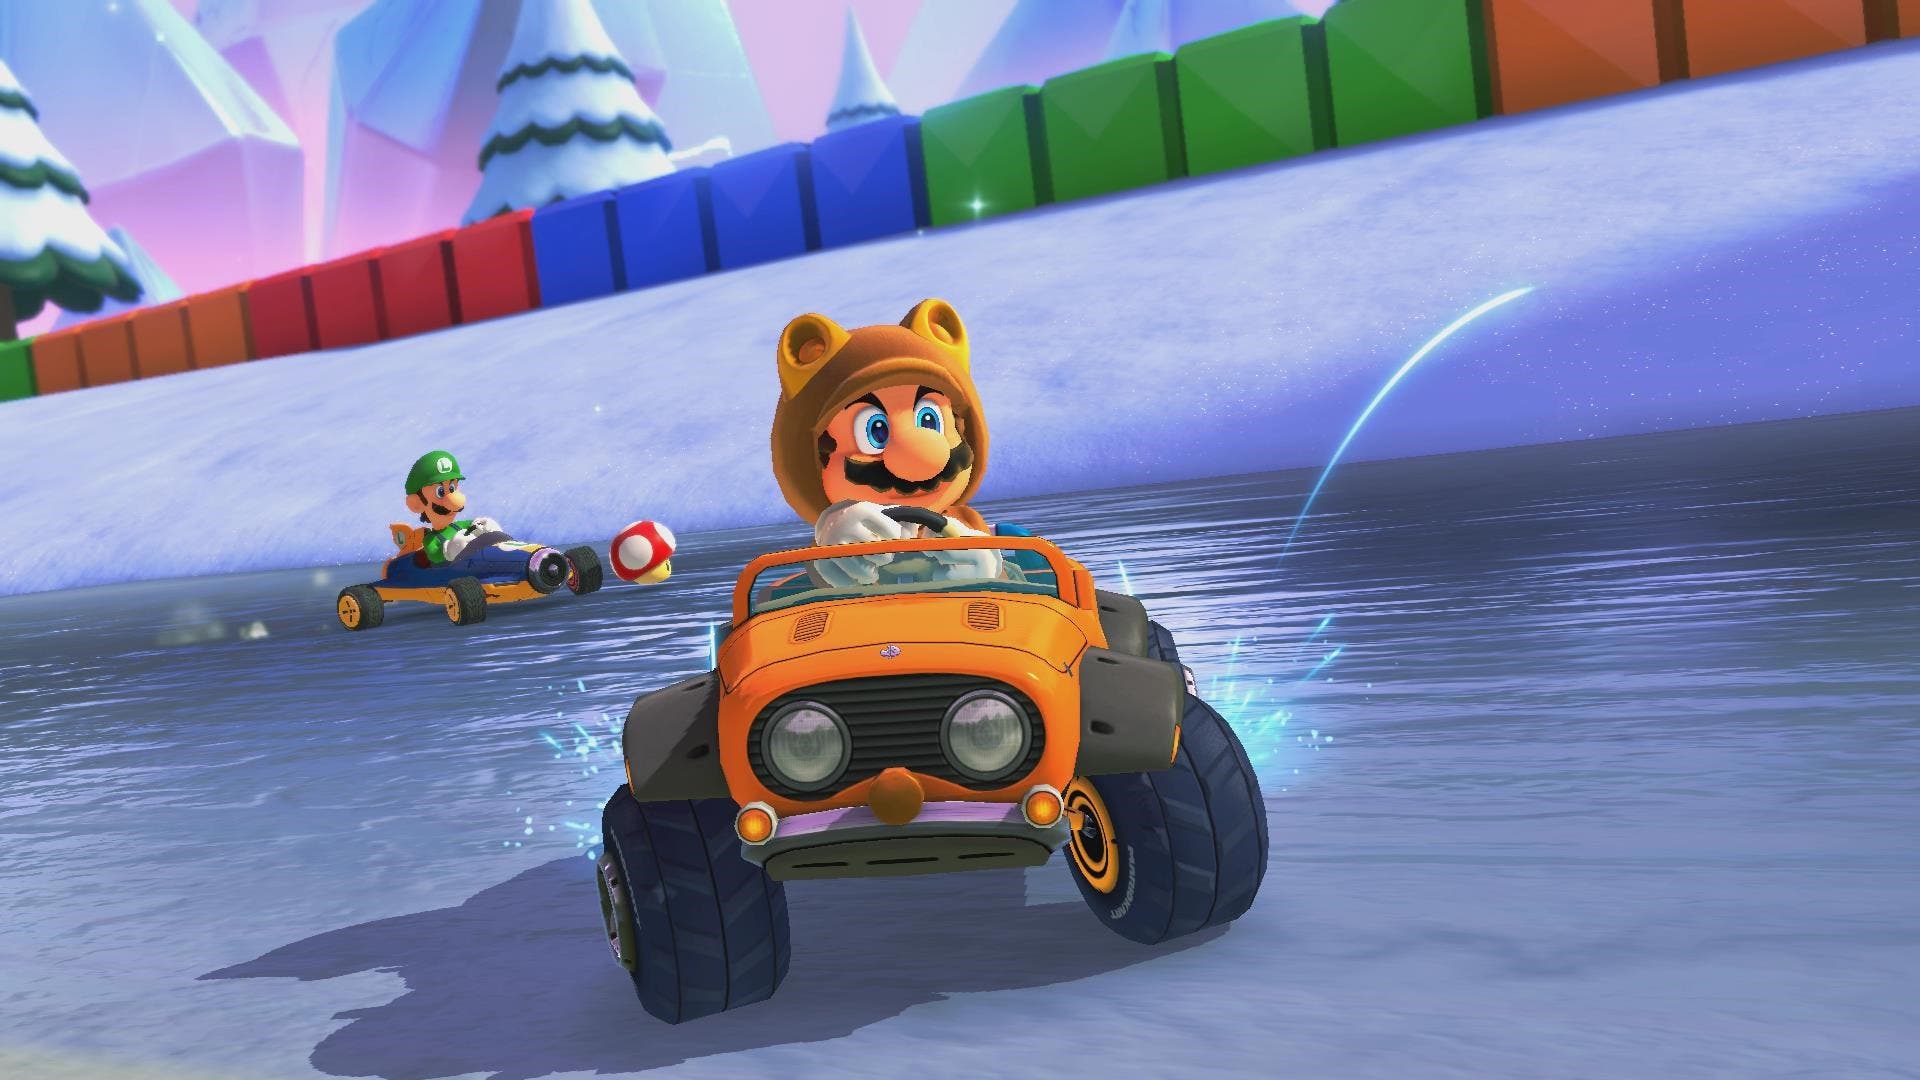 The new version 2.1.0 of Mario Kart 8 Deluxe includes all these general changes to ghosts, item chests and more